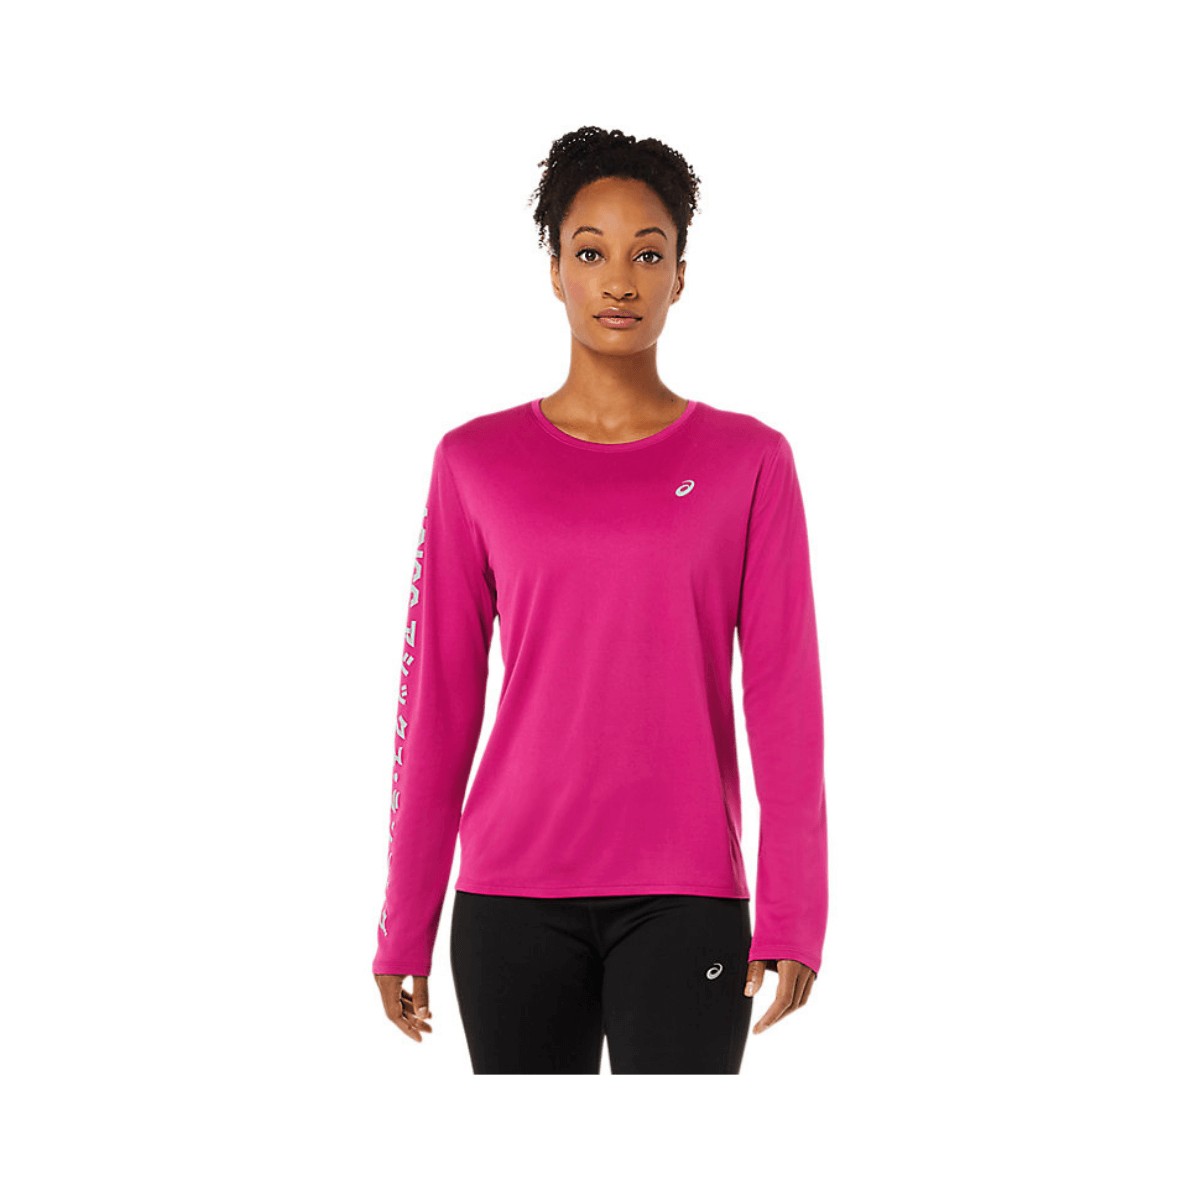 T-Shirt Asics Katakana Femme Manches Longues Violet, Taille S